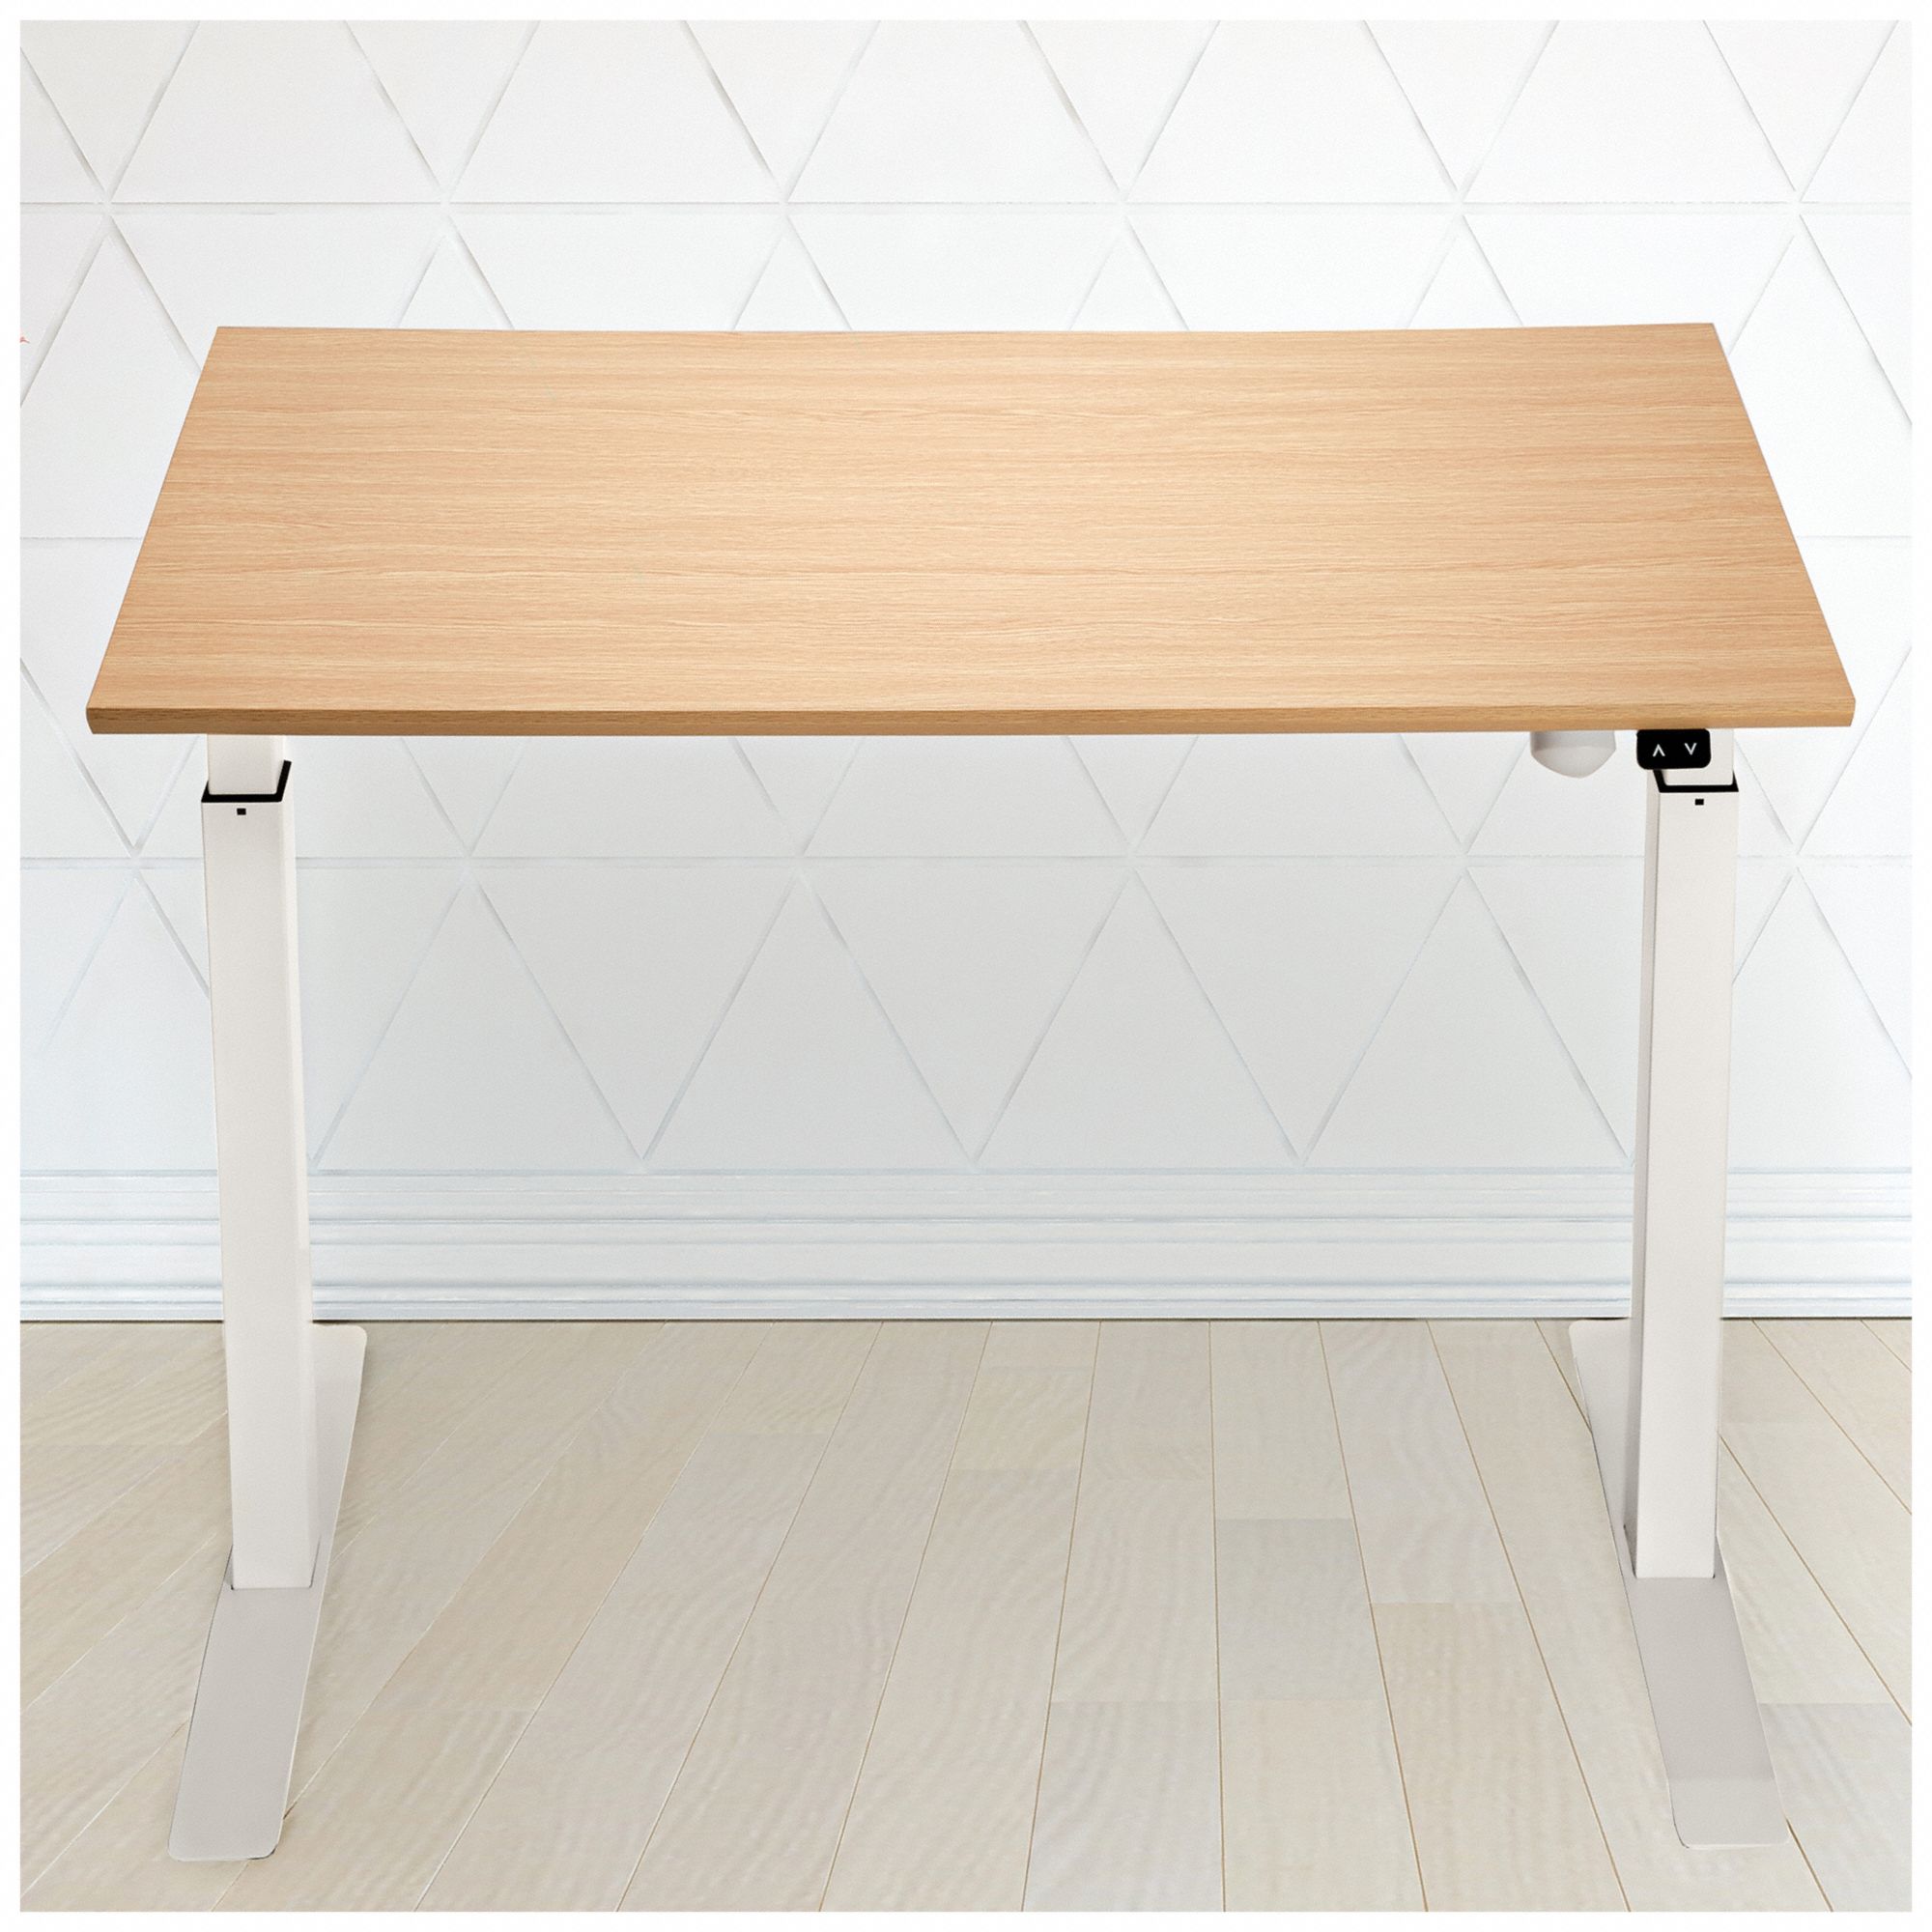 Adjustable Desk: 47 in Overall Wd, 28 in to 47 in, 24 in Overall Dp, White Top